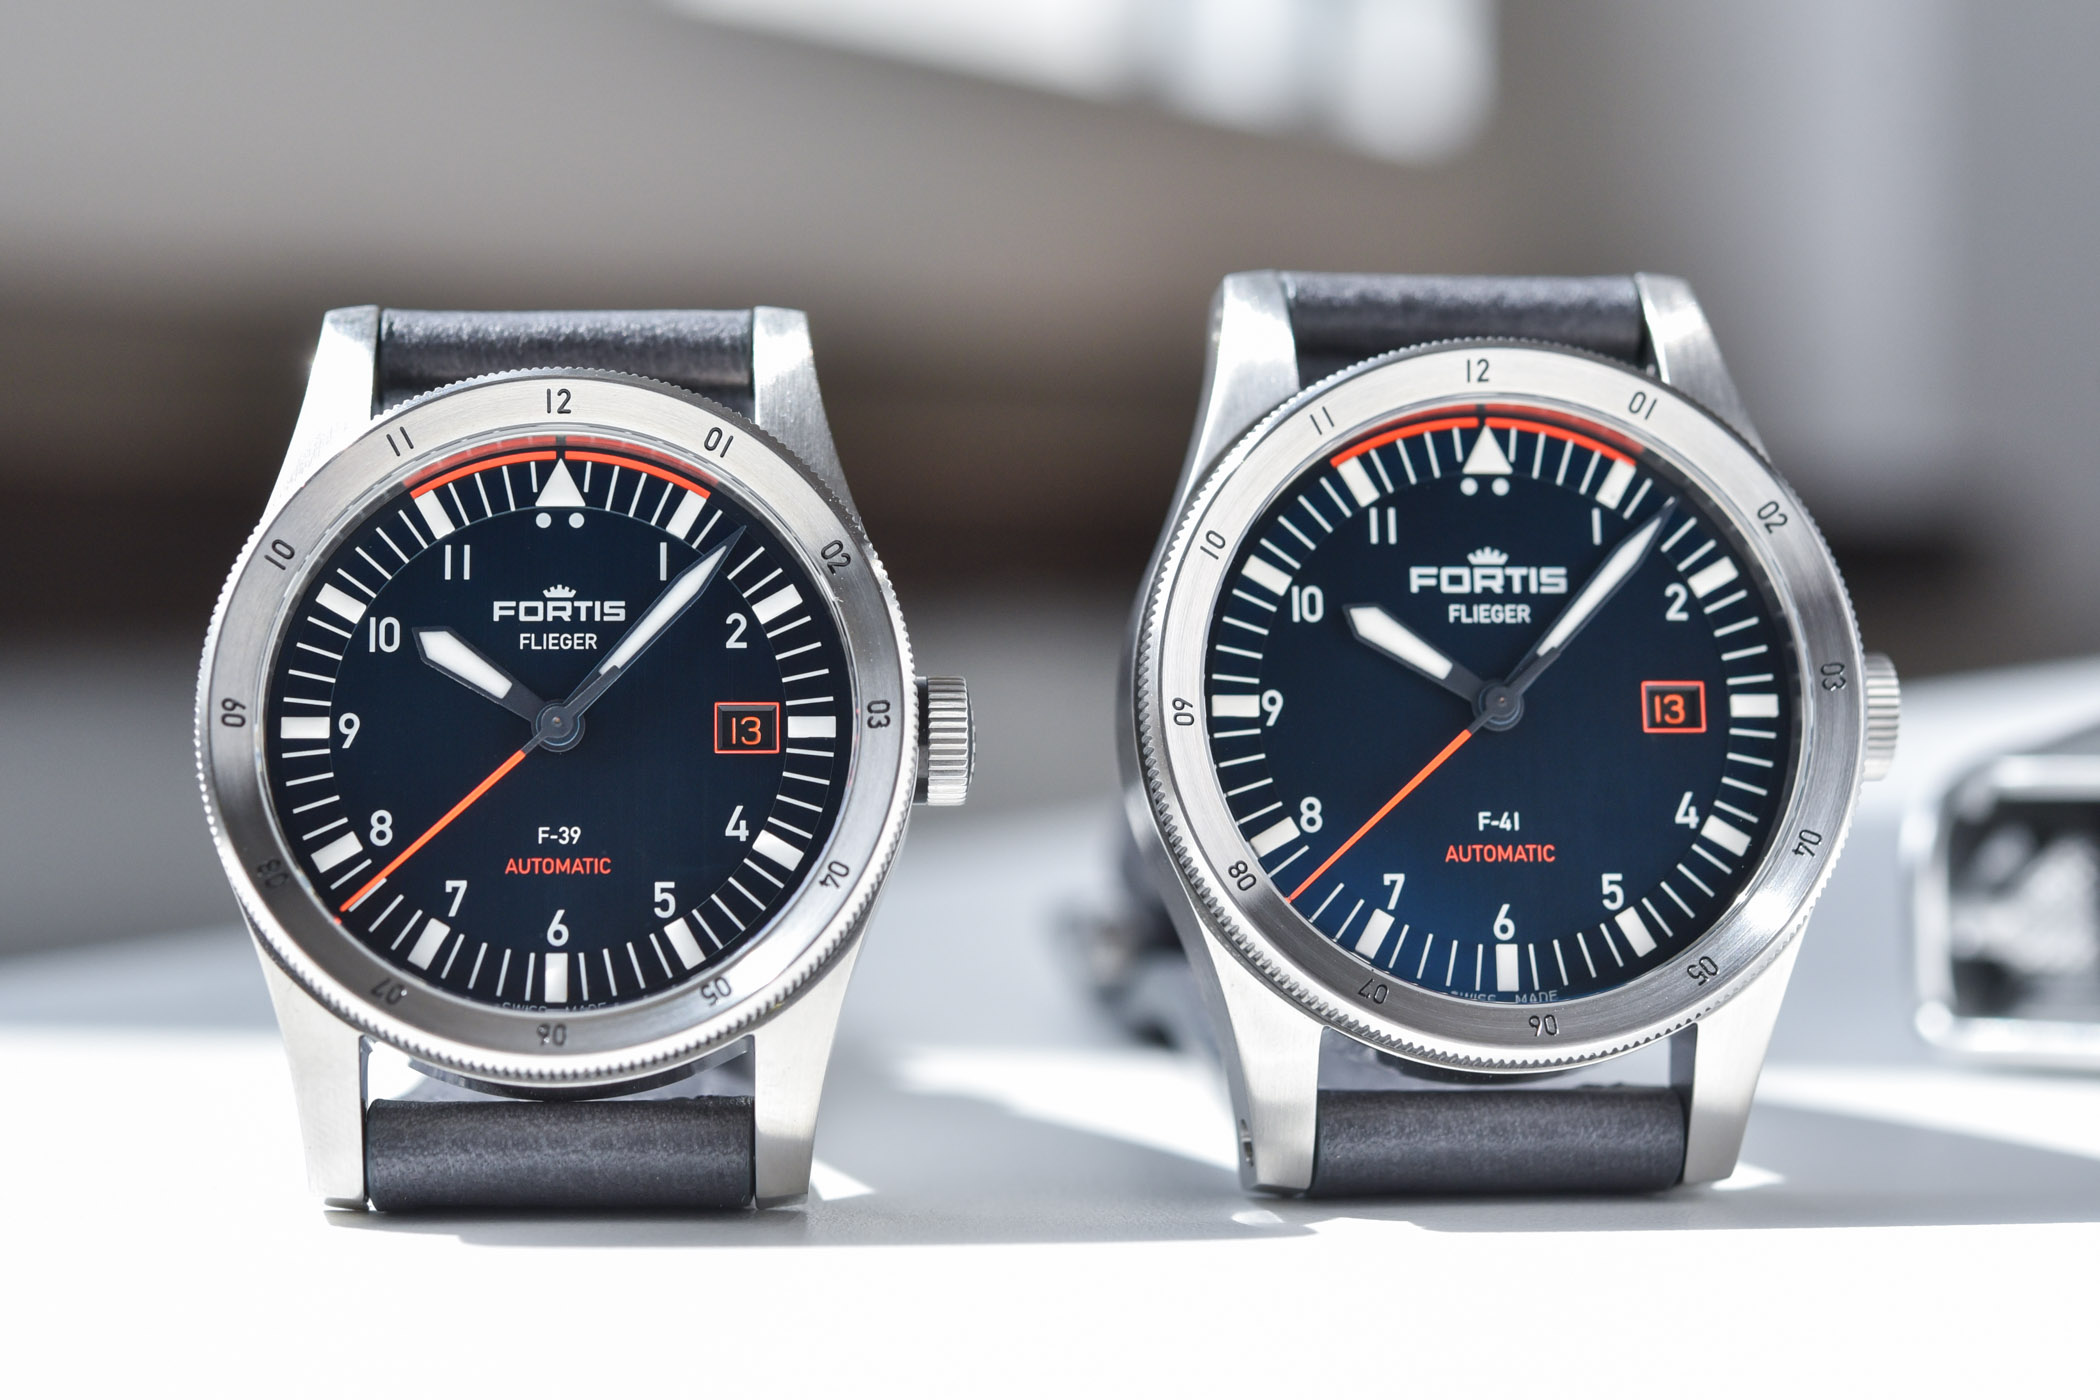 Fortis Flieger F-39 and F-41 Midnight Blue